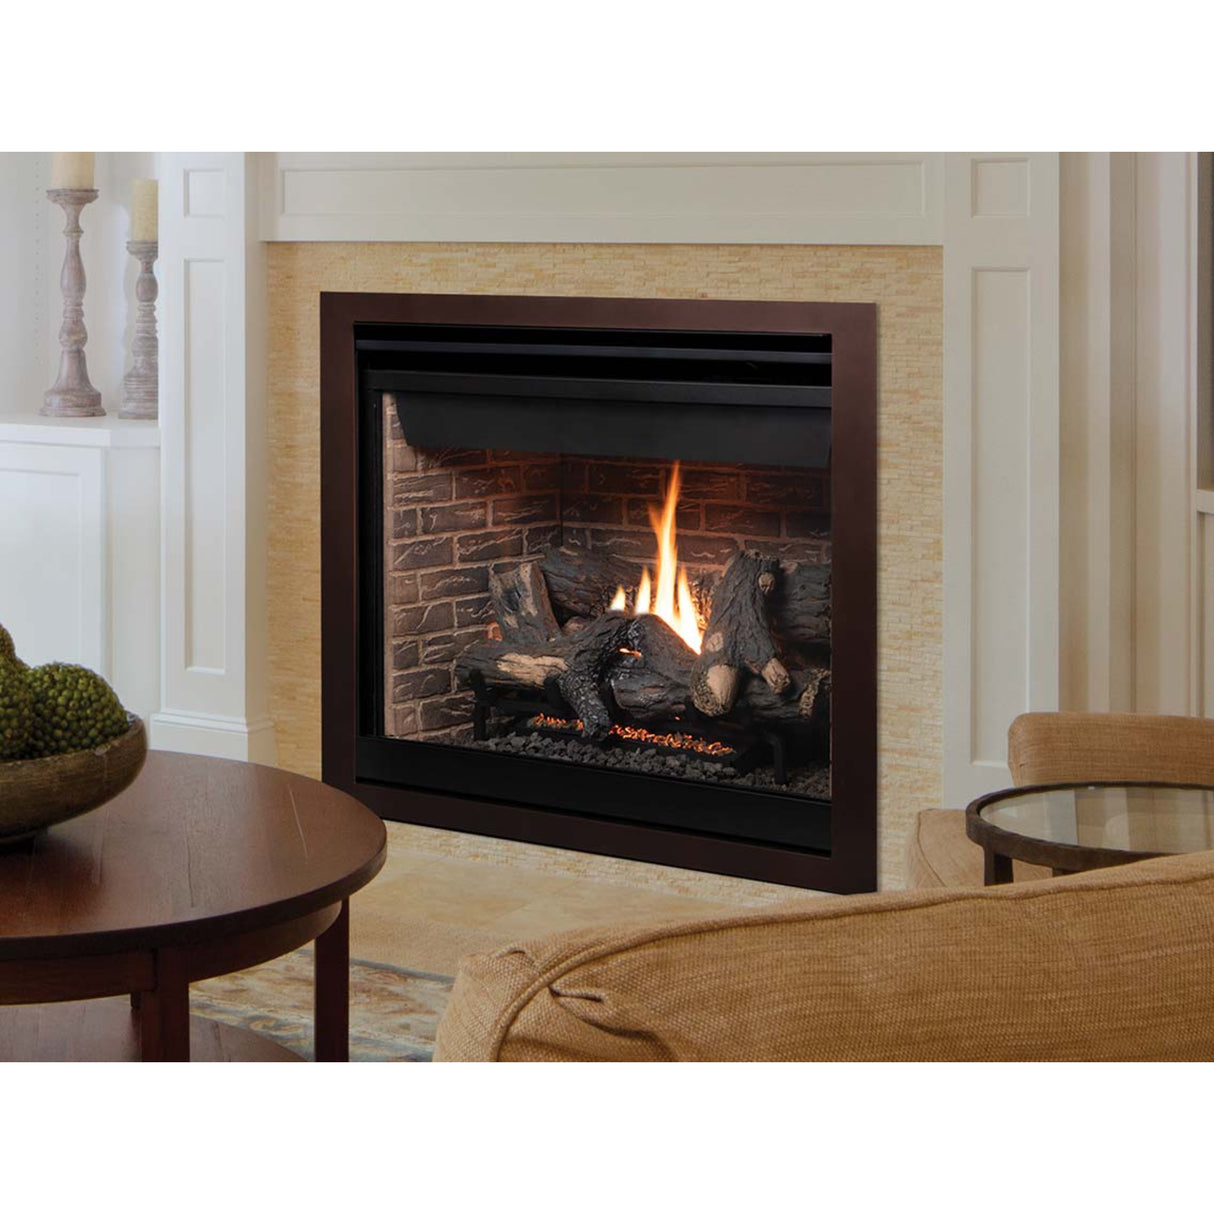 Astria Altair 40 Direct-Vent Fireplace, Top/Rear Combo